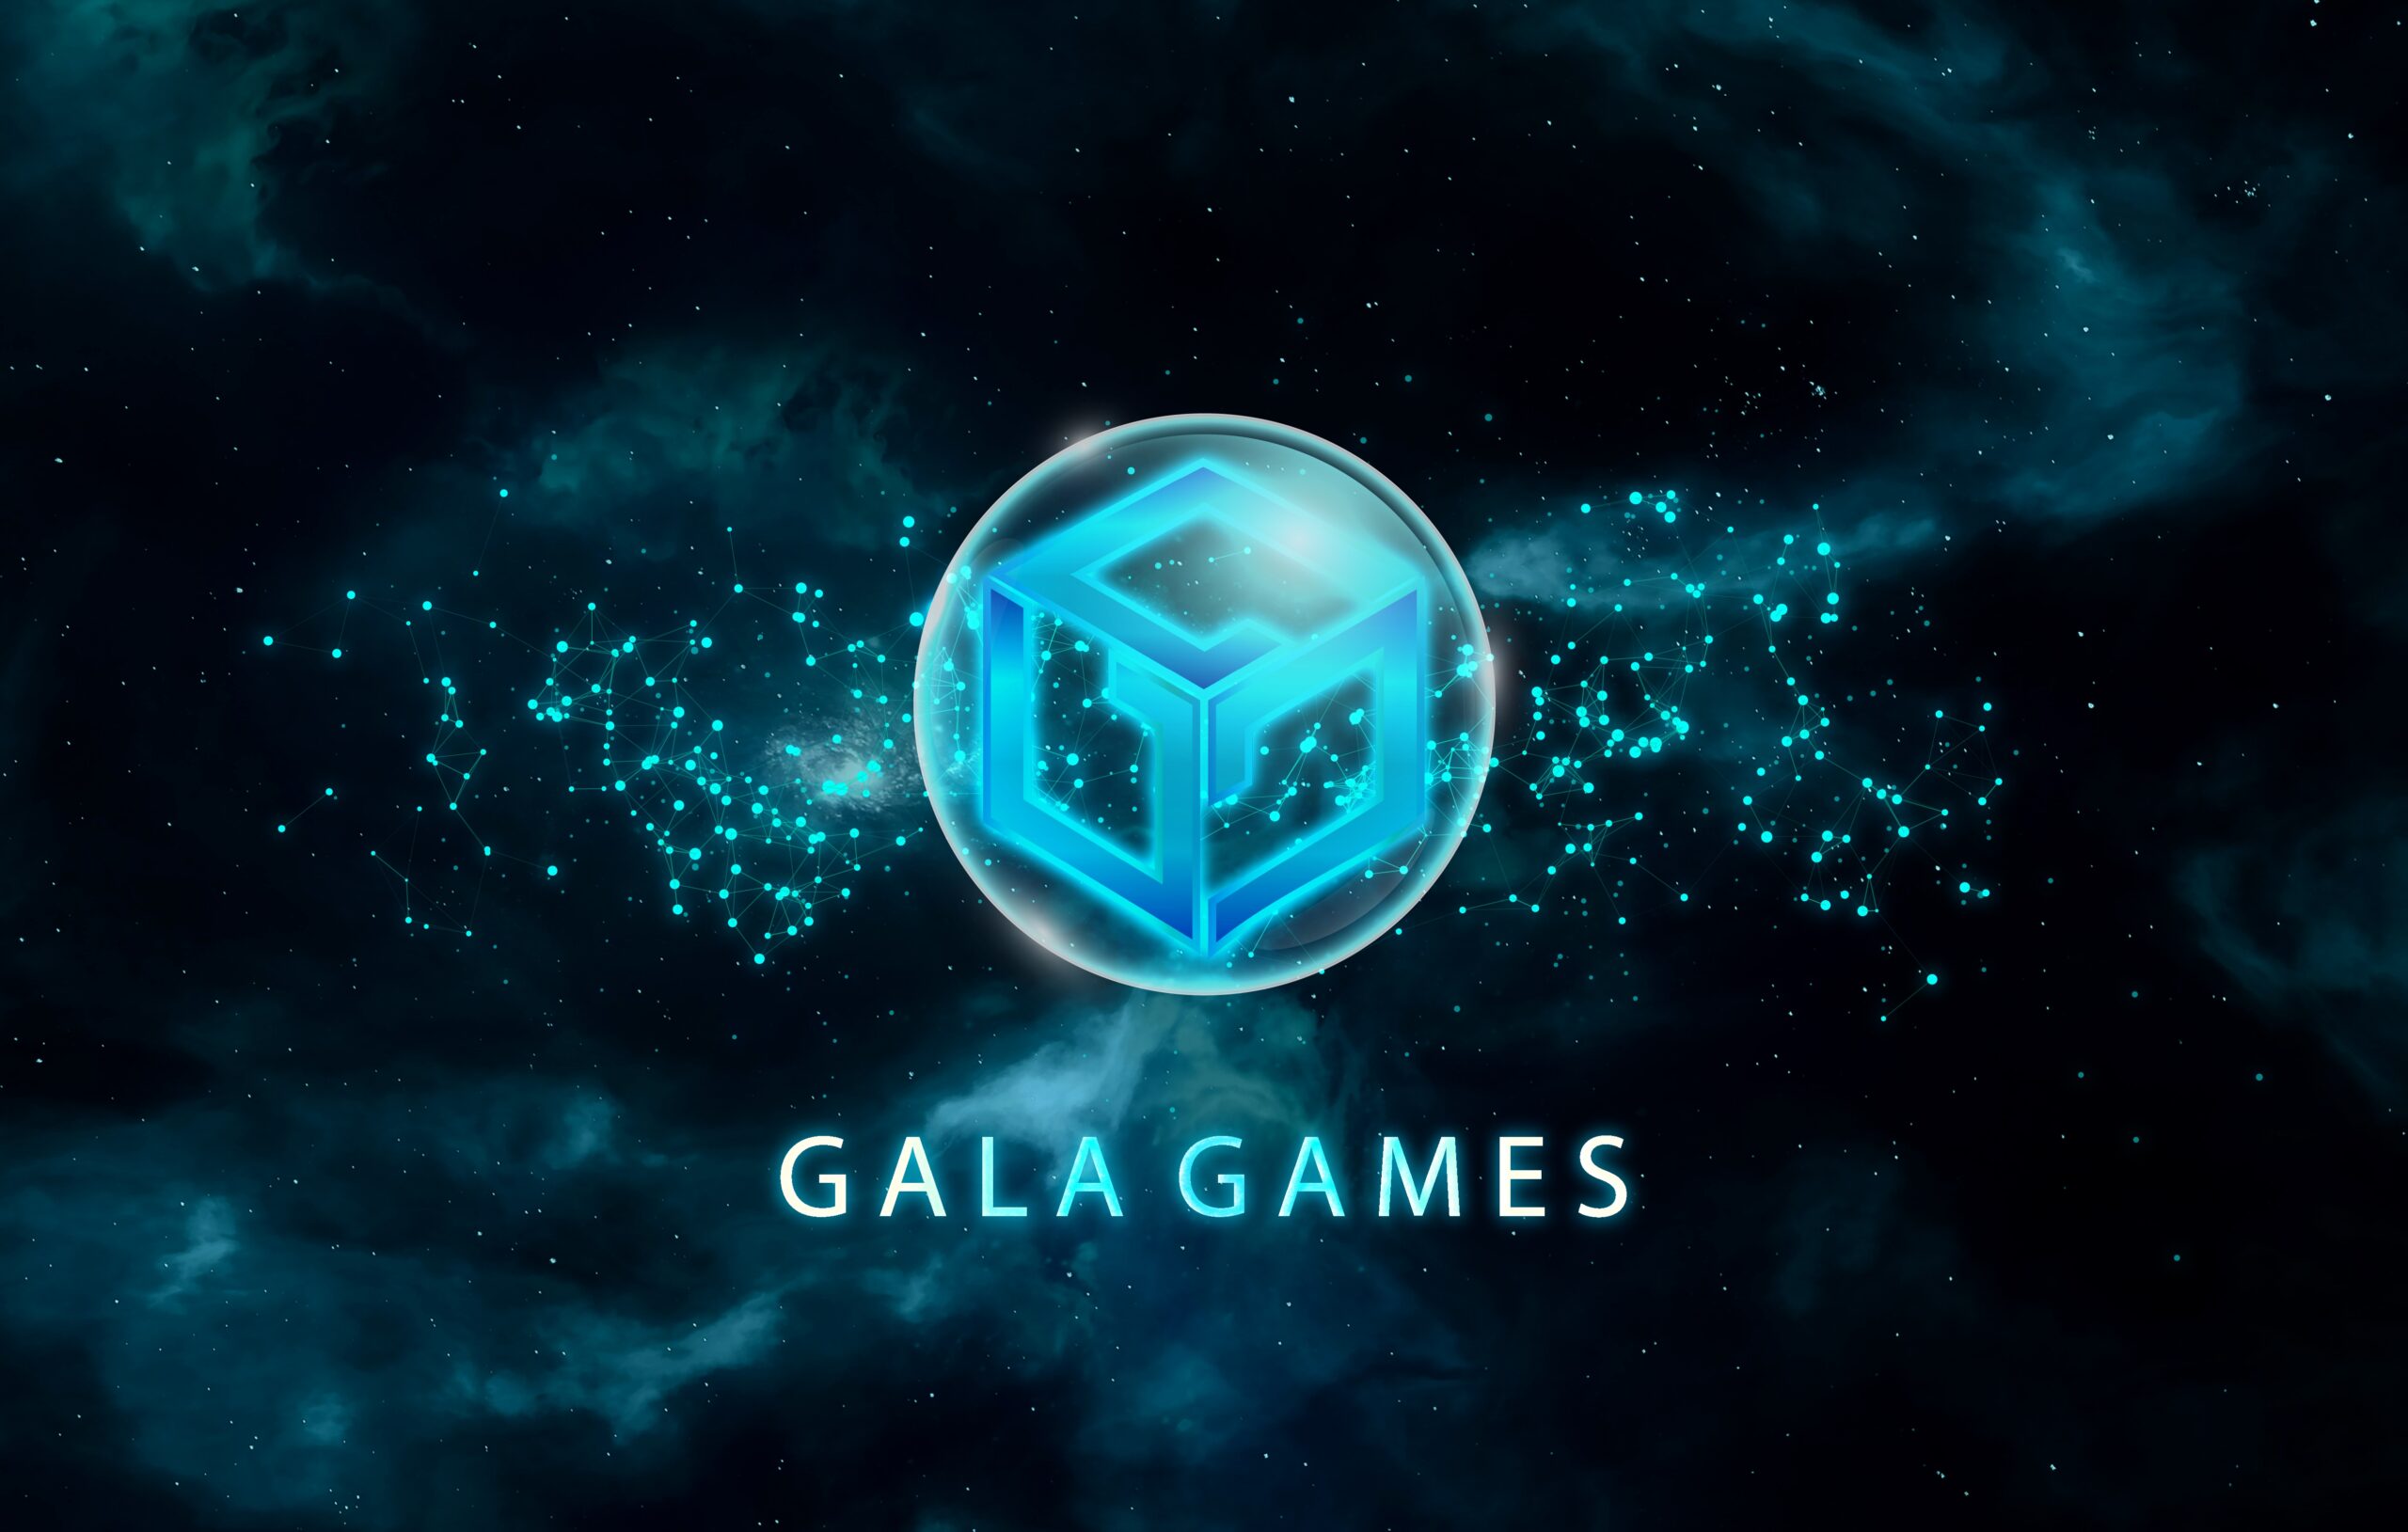 GALA V2 token airdrop: What you need to know